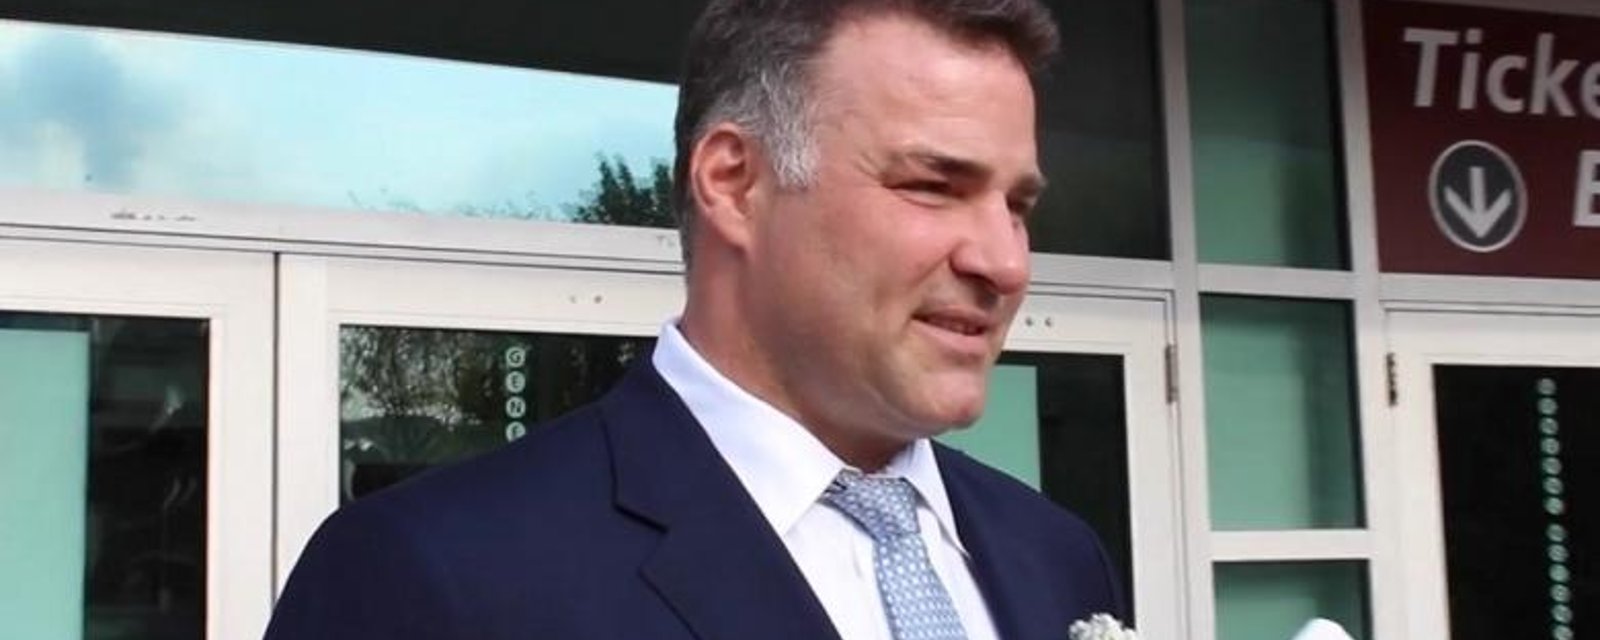 Former NHL forward Lindros inducted into Oshawa Sports Hall of Fame.